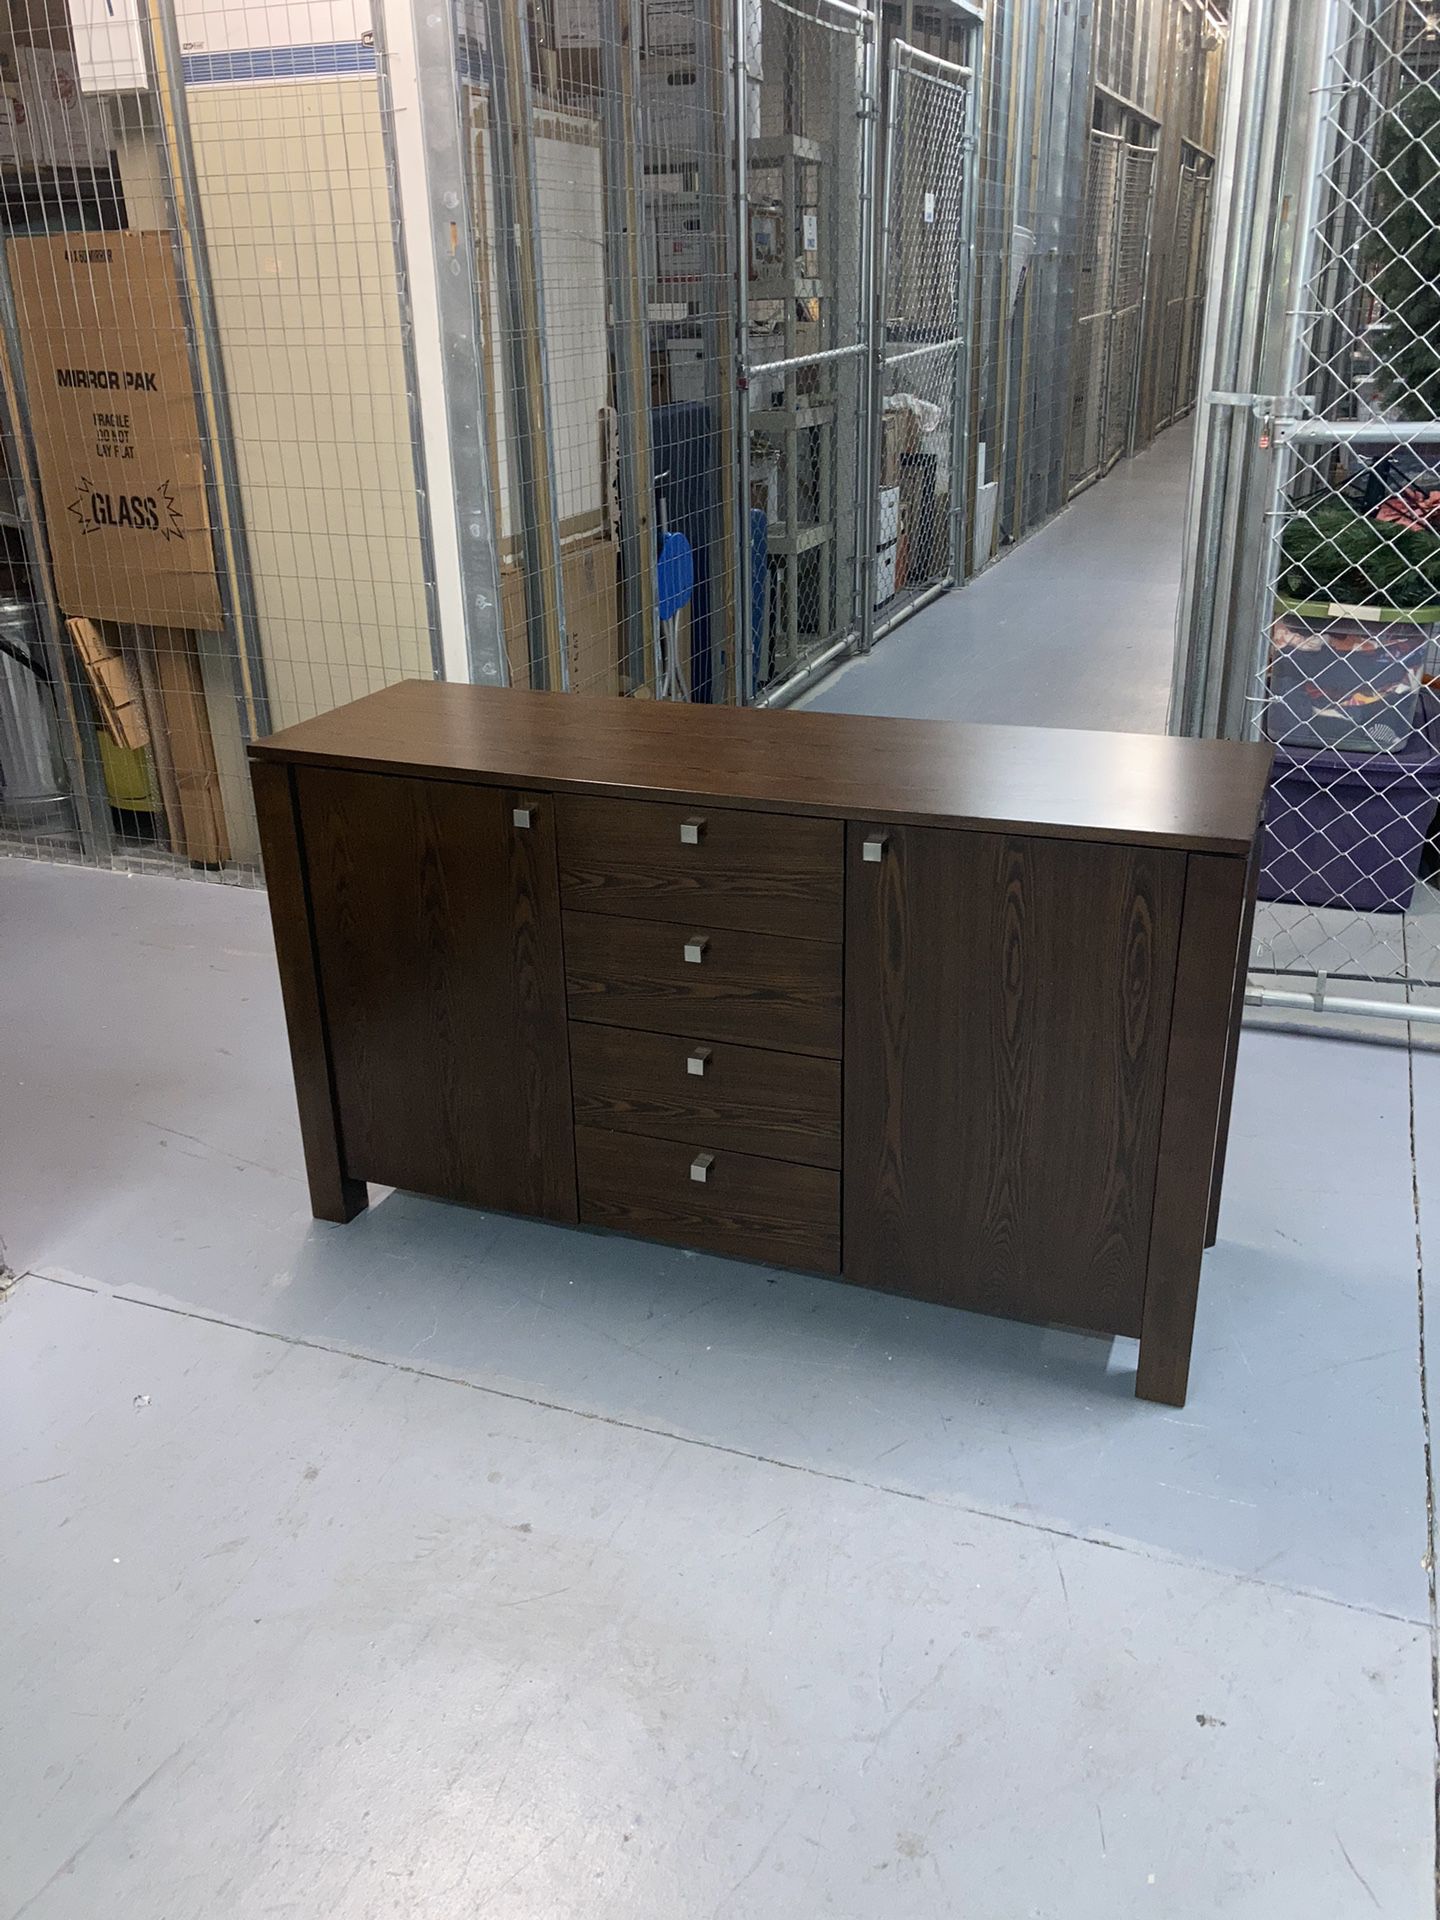 Wood TV Stand/Buffet DELIVERY~AVAILABLE 